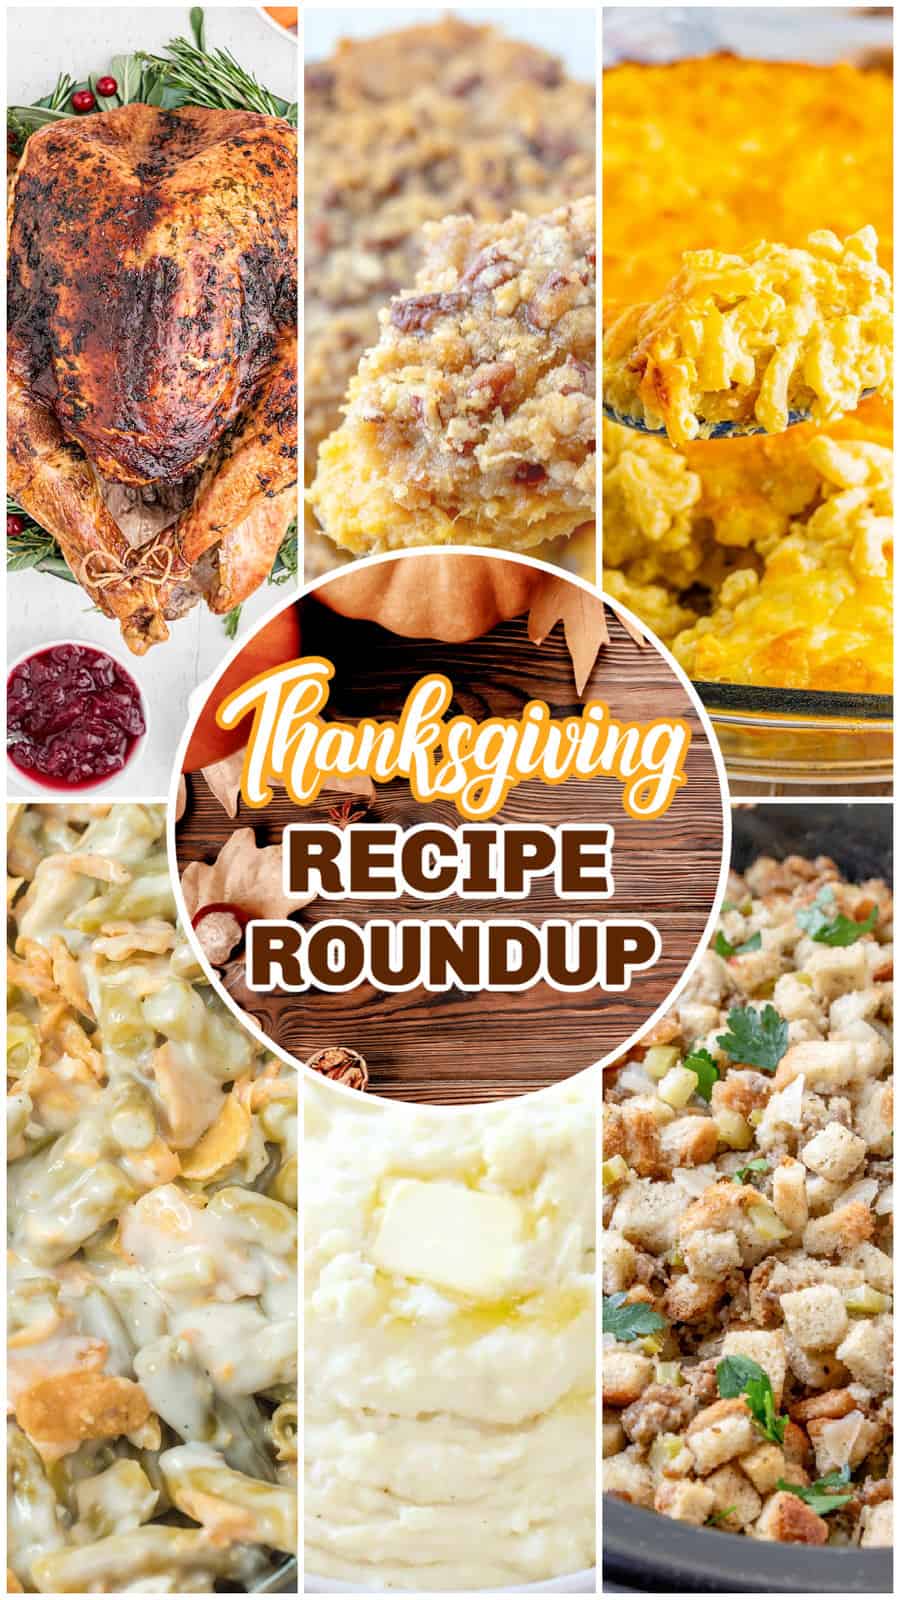 a collage of 6 images of Thanksgiving food with text in the center that says "Thanksgiving Recipe Roundup." 